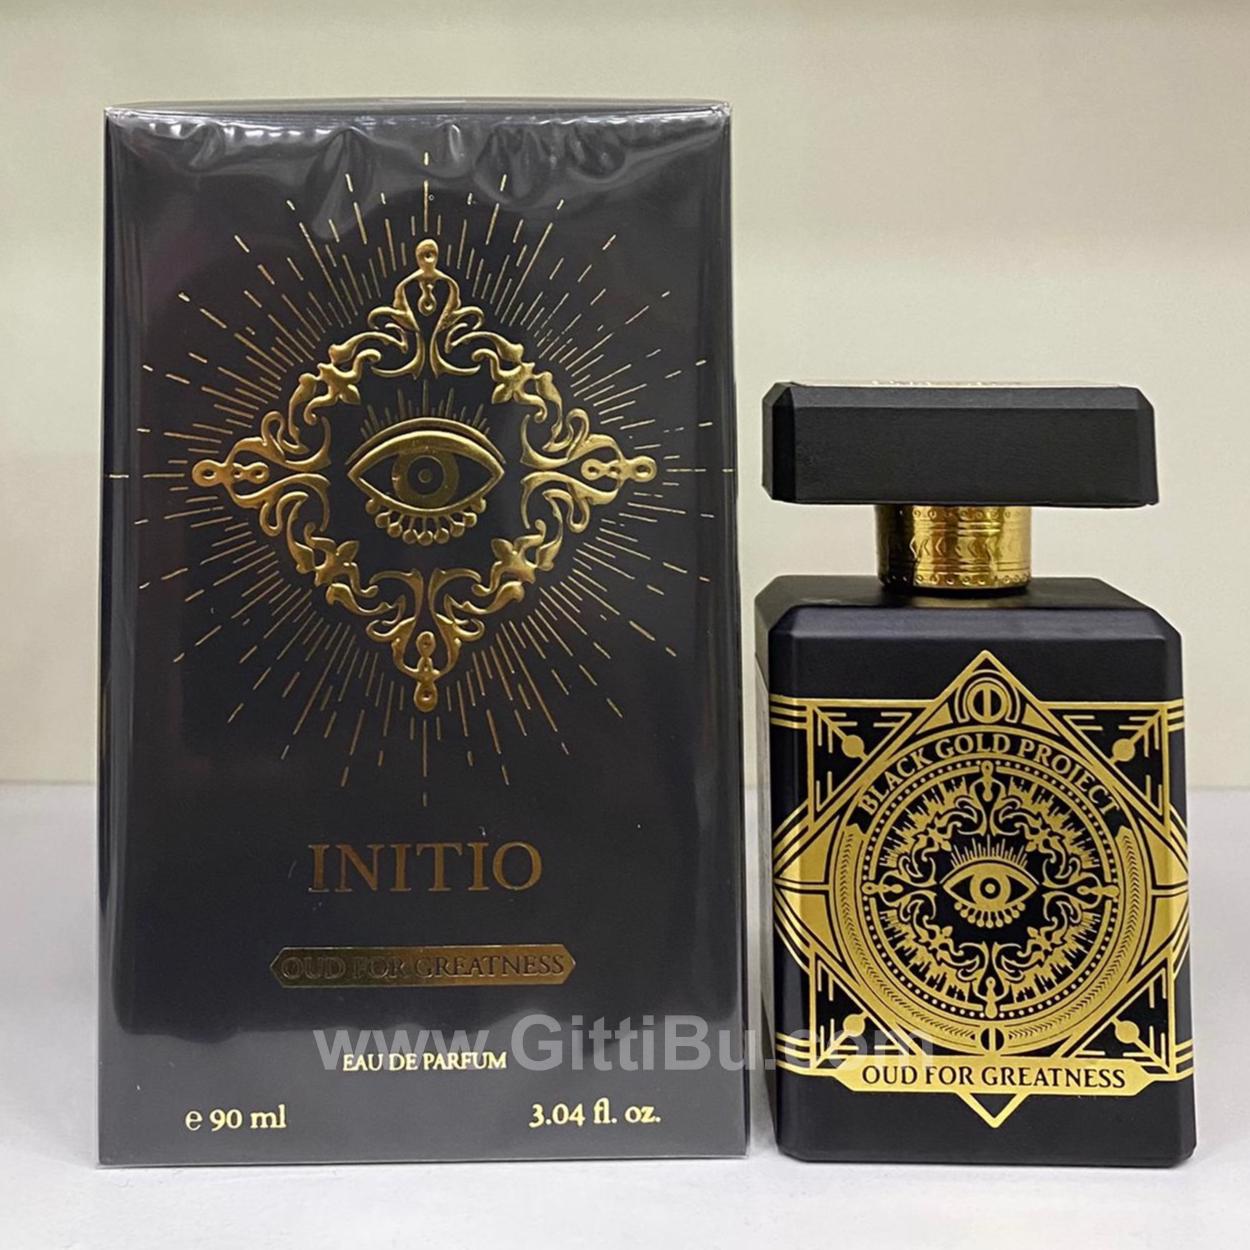 İnitio Oud For Greatness Edp 90 Ml